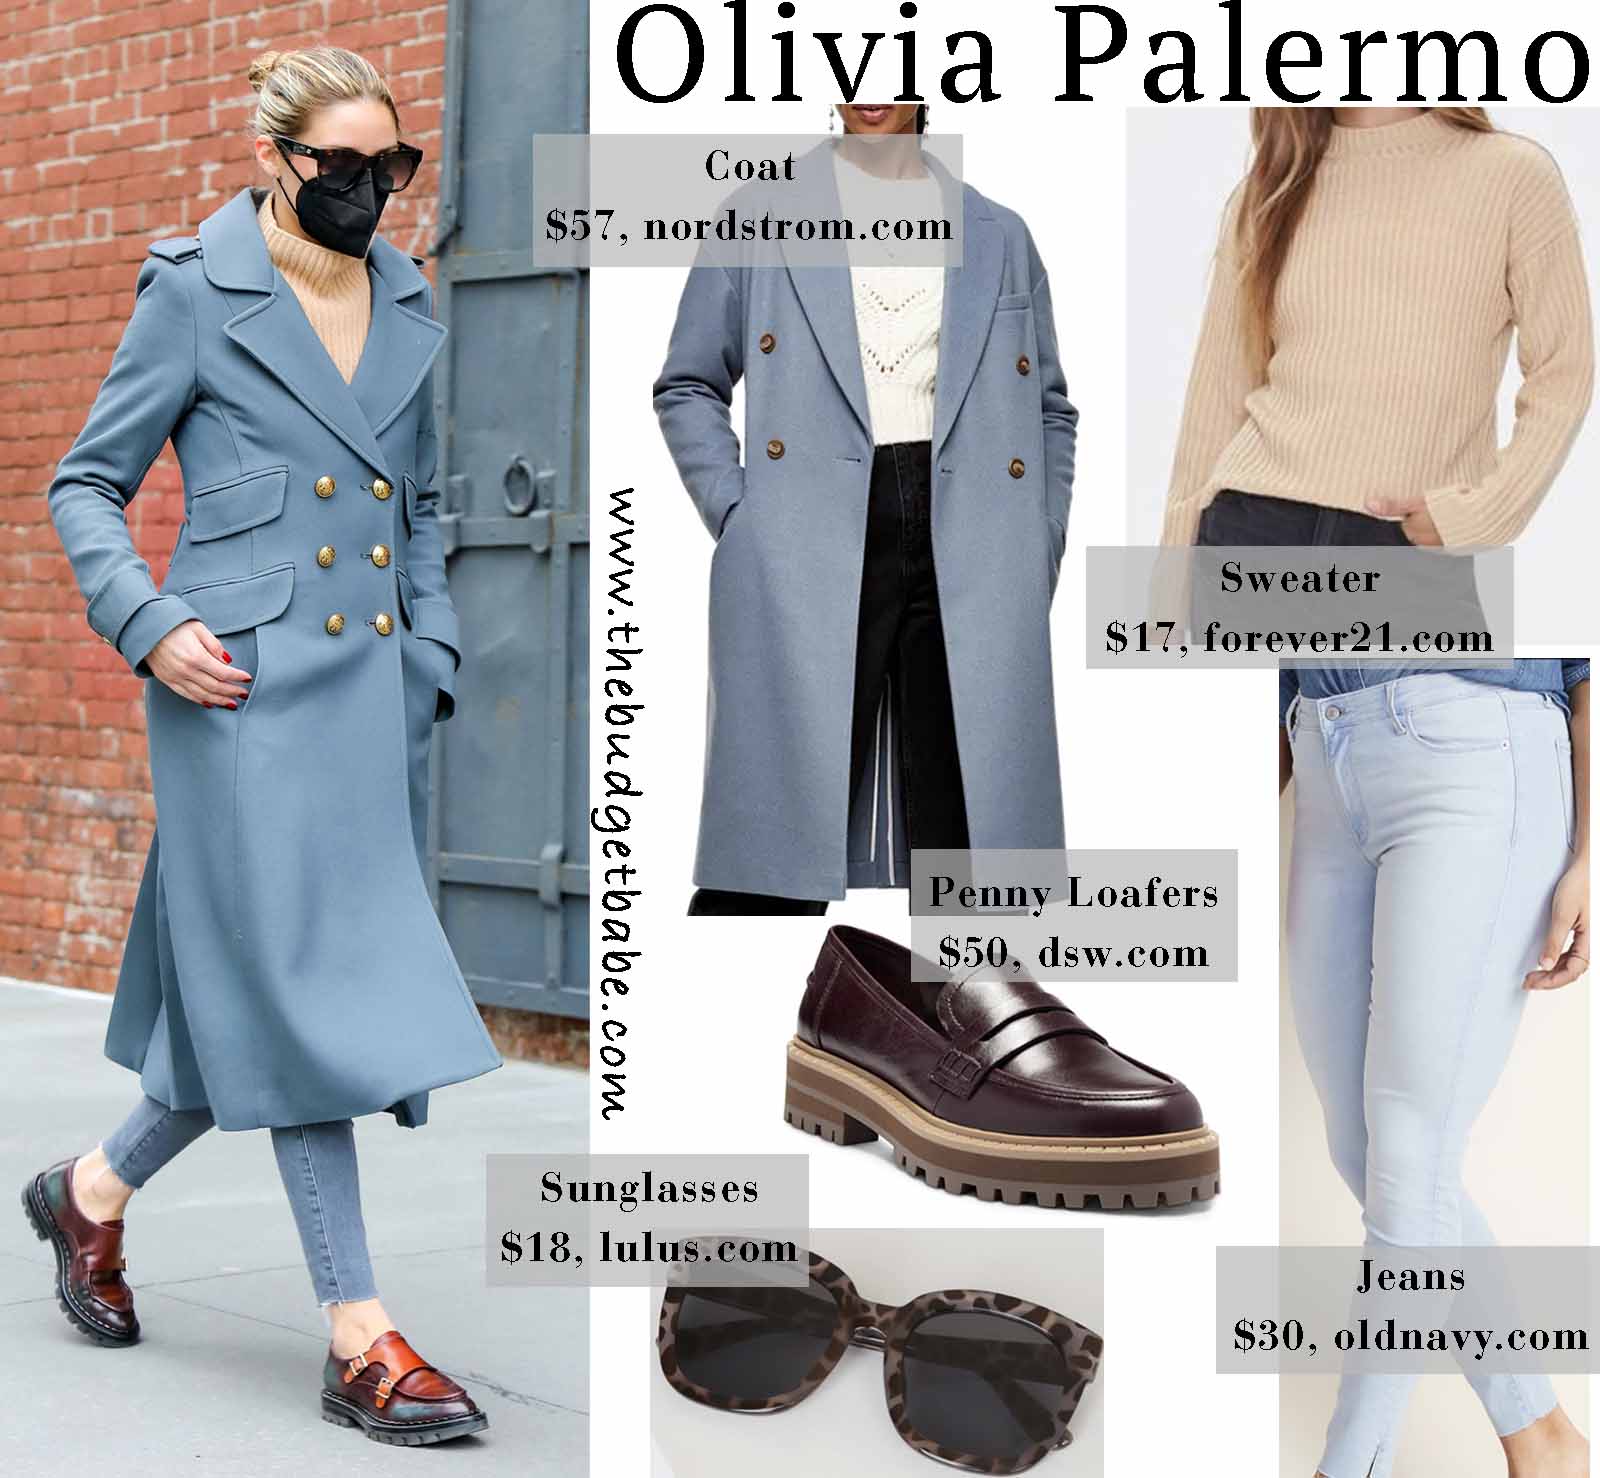 Olivia's style is timeless!